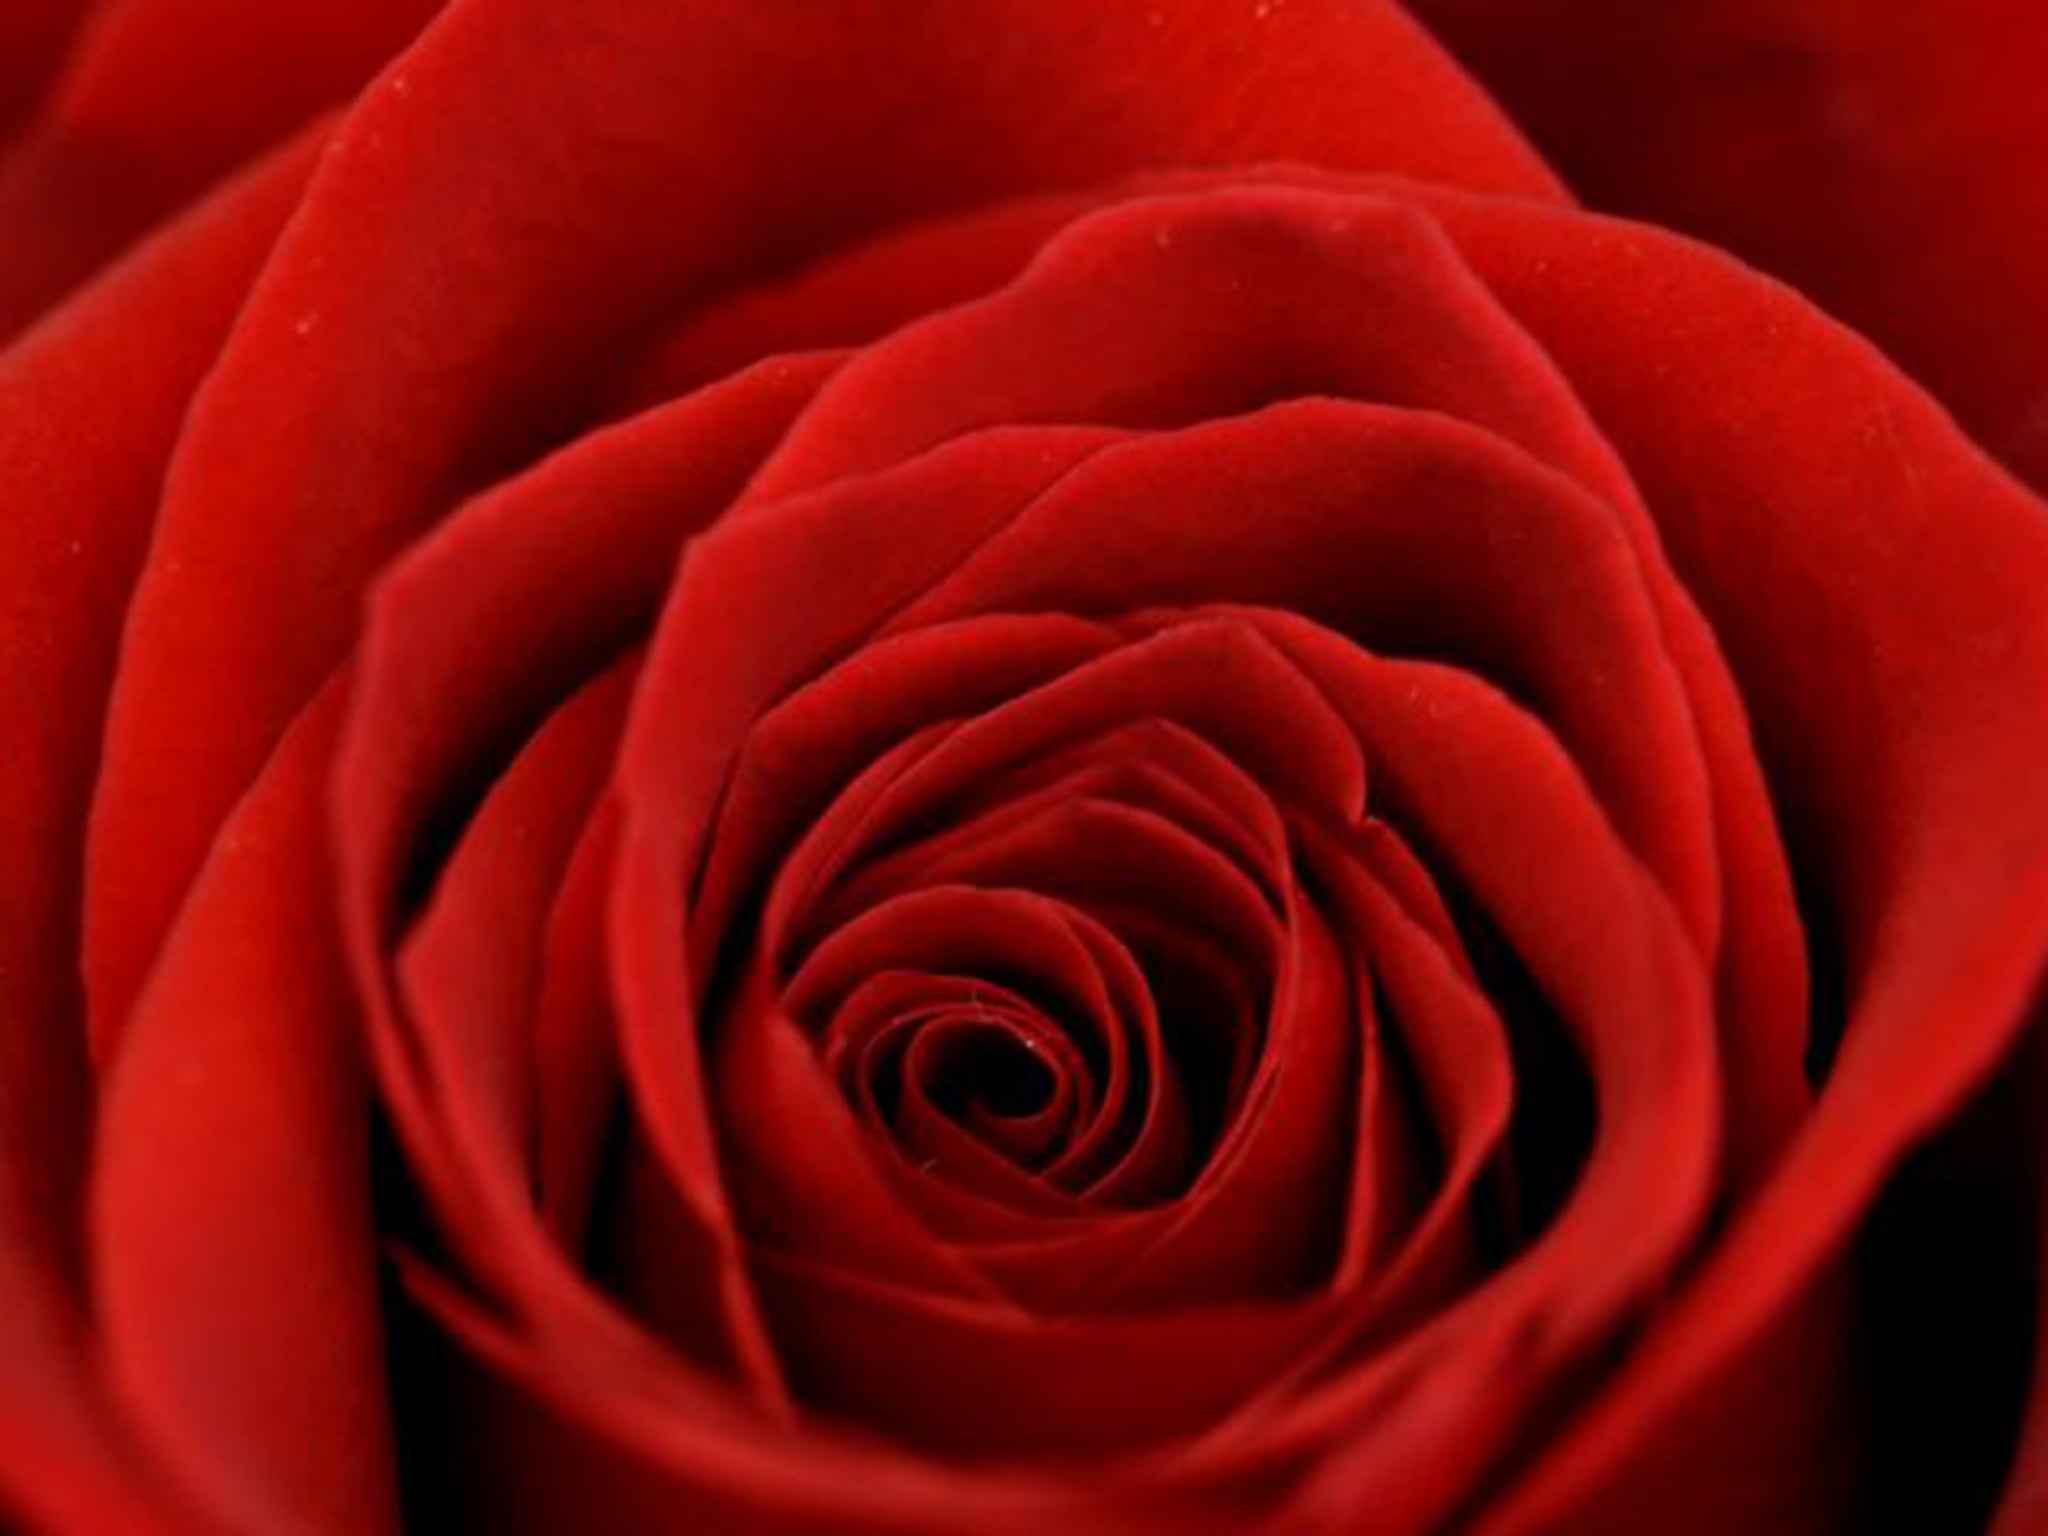 Scientists have identified an enzyme known as RhNUDX1 which plays a key role in producing the sweet fragrance of roses